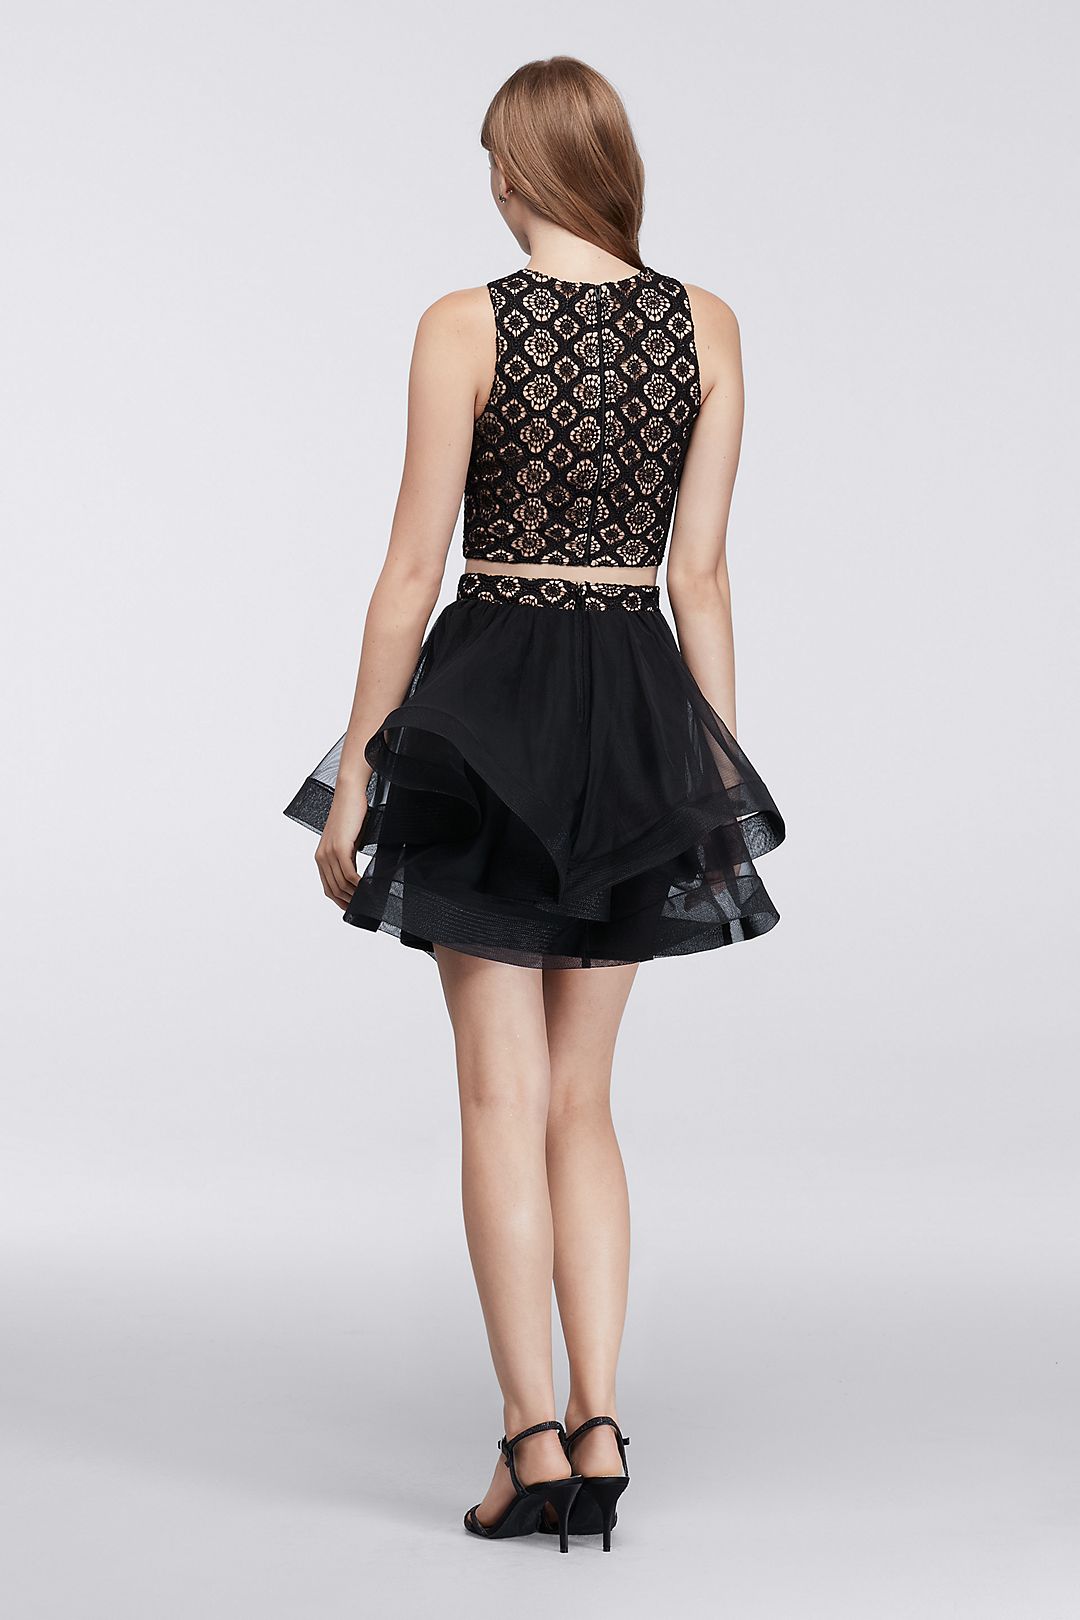 Lace Homecoming Crop Top with Tiered Skirt Image 4